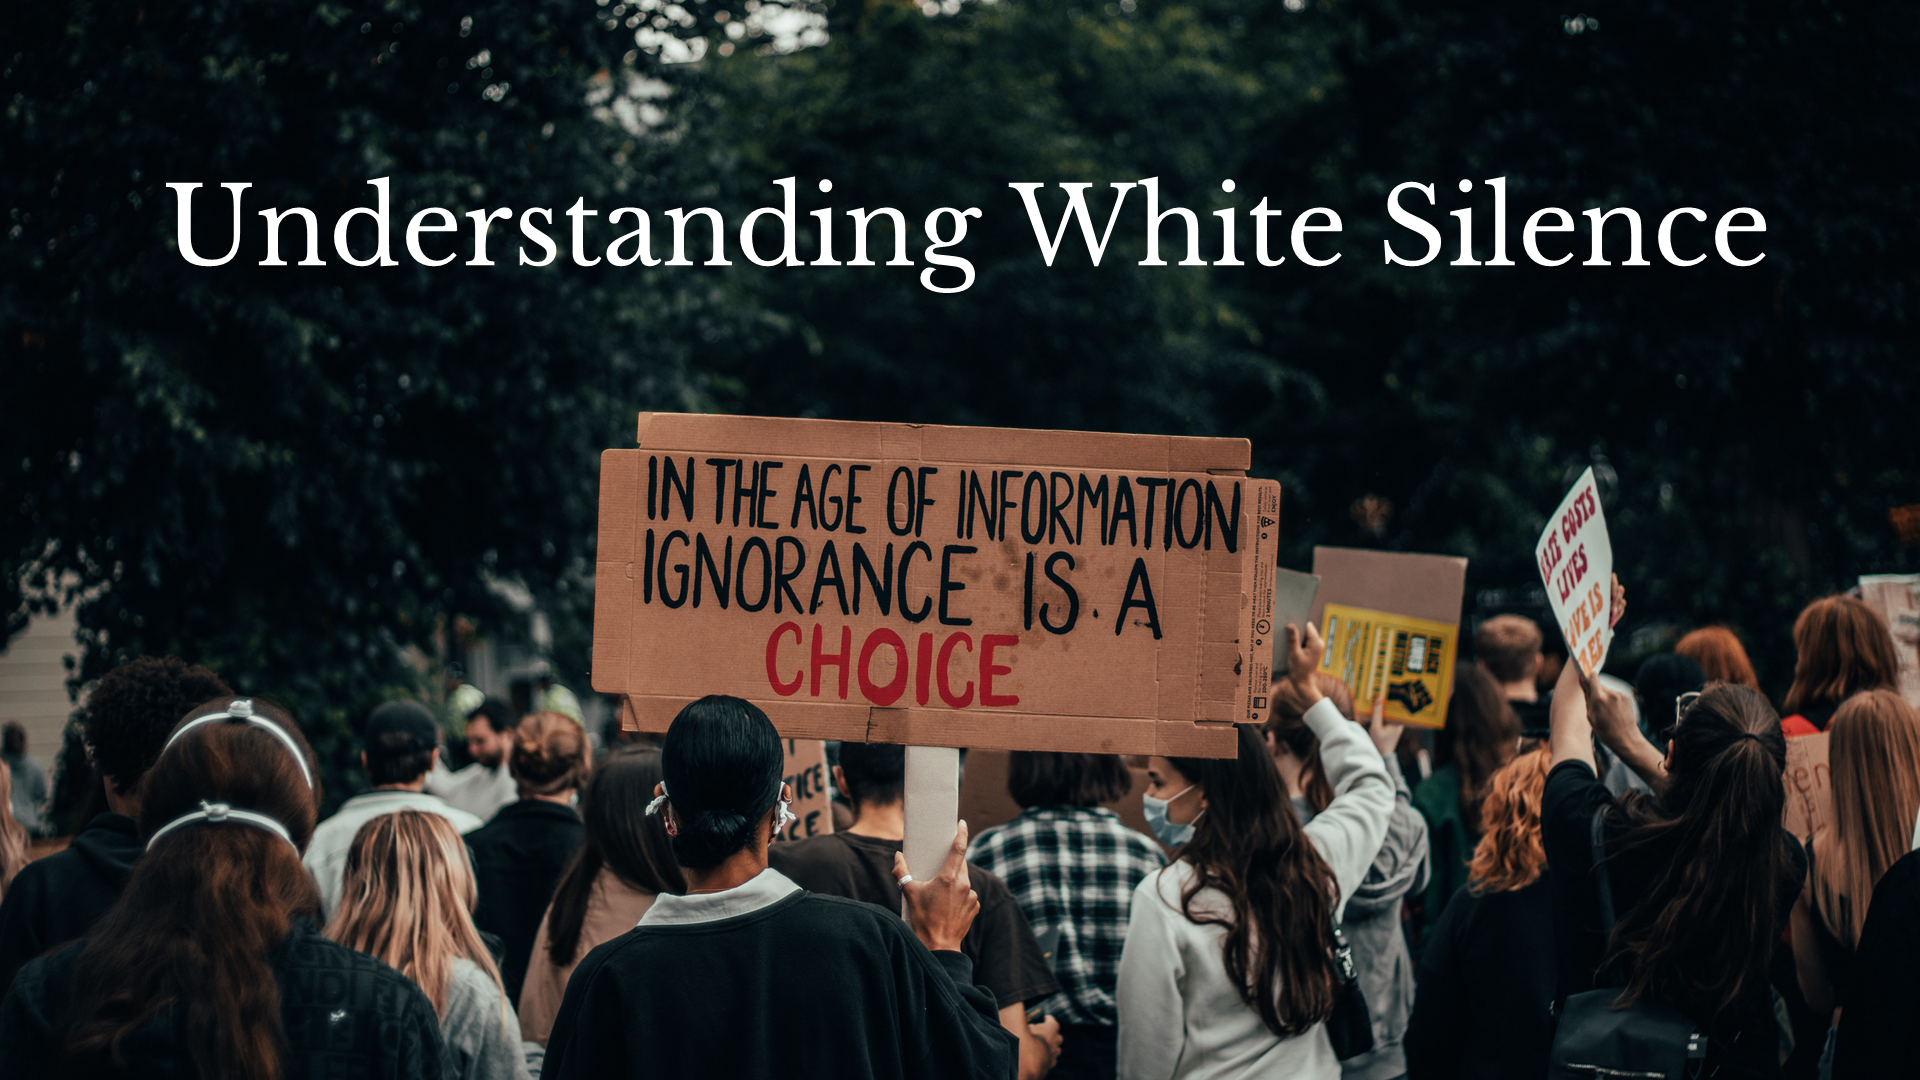 information from Rev. Dr. Cynthia Ramirez Lindenmeyer on white silence, Sacred Activism